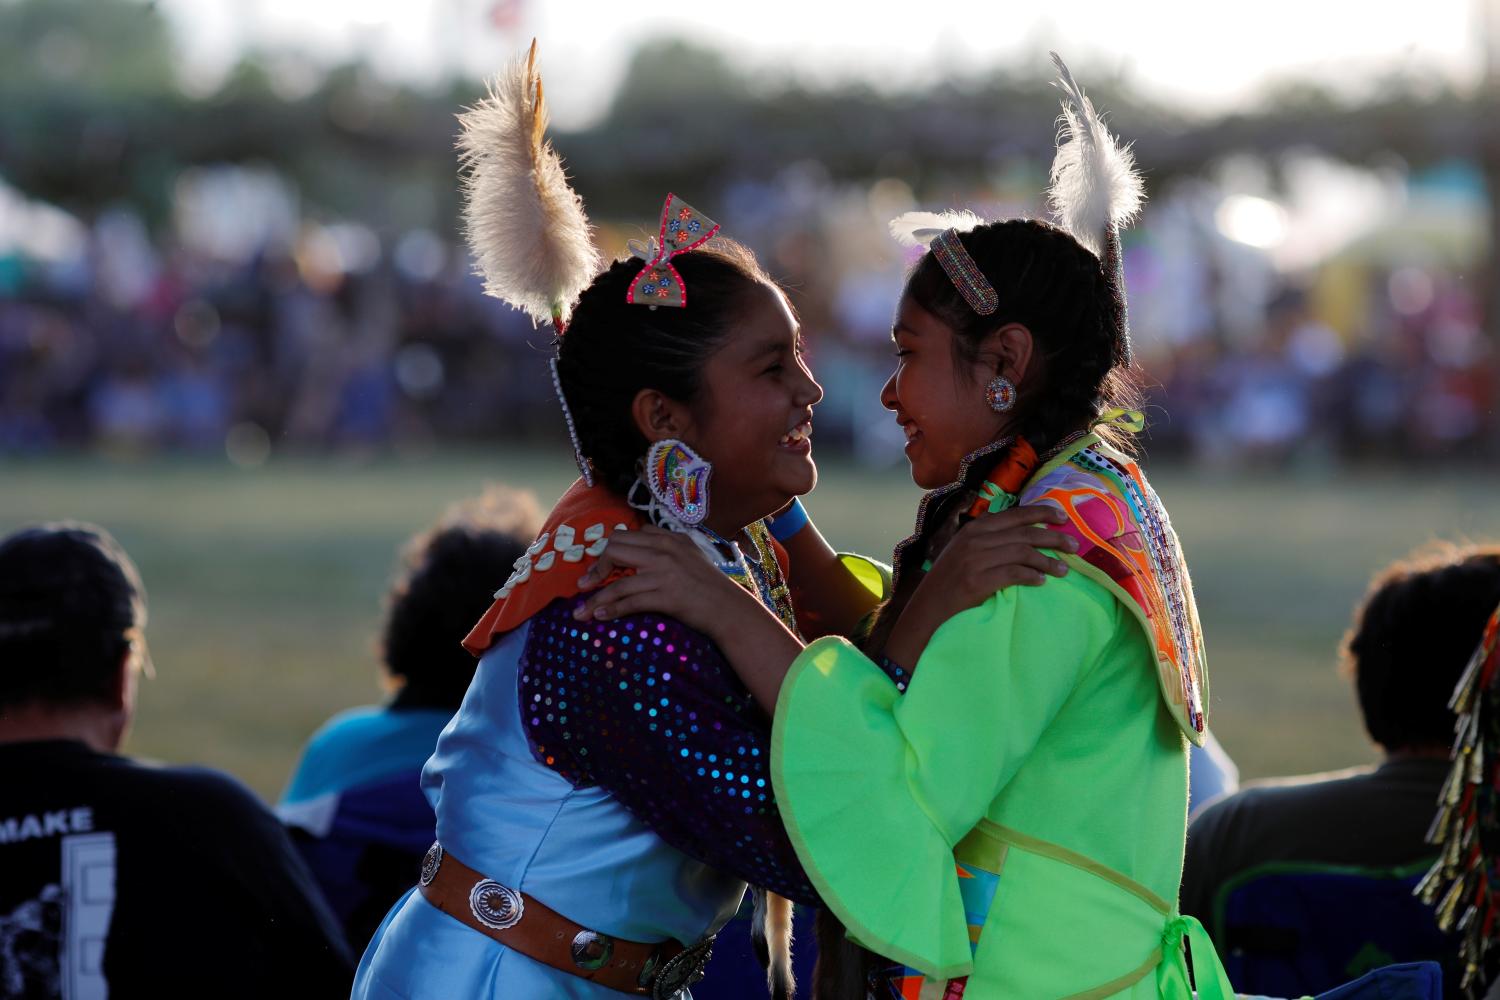 Thirteen-year-old Nizhoni Stencil, who is Navajo, and twelve-year-old Tasia Pecos, who is Jemez, prepare for the Grand Entry on the opening night of the 32nd Annual Taos Pueblo Pow Wow, a Native American dance competition and social gathering, in Taos, New Mexico, U.S., July 7, 2017.  Picture taken July 7, 2017.   REUTERS/Brian Snyder